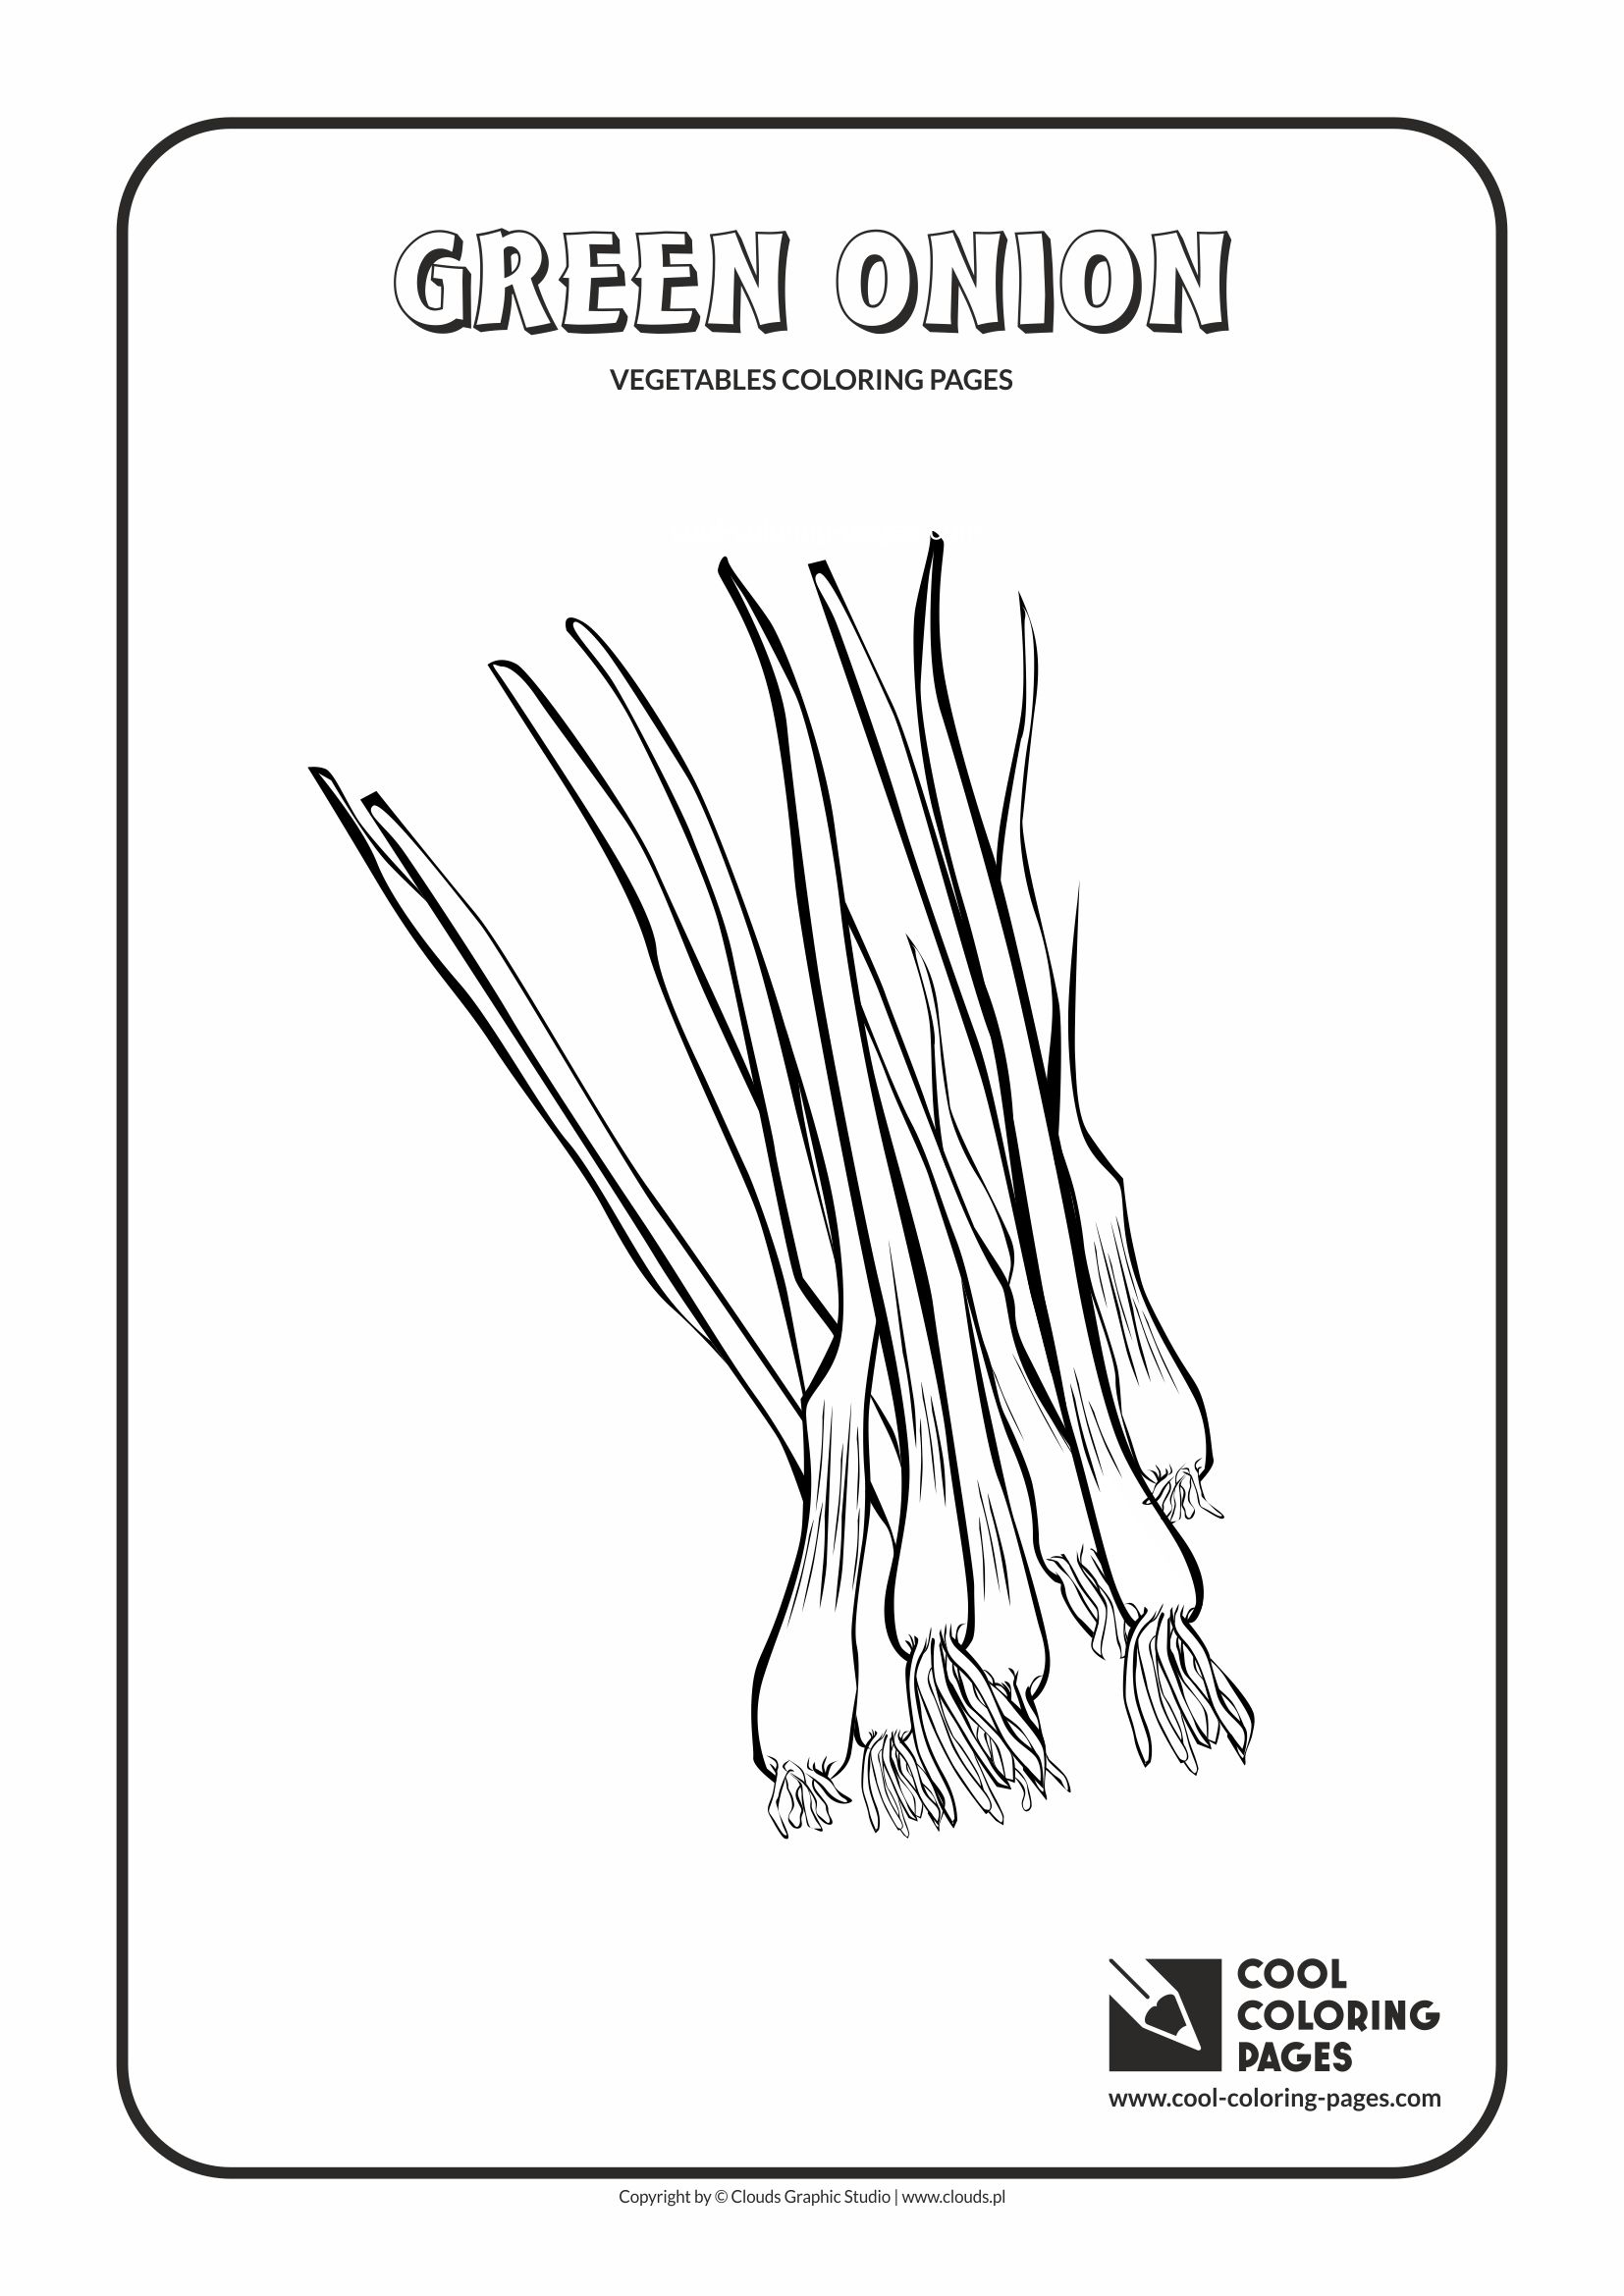 Cool Coloring Pages - Plants / Green onion / Coloring page with green onion